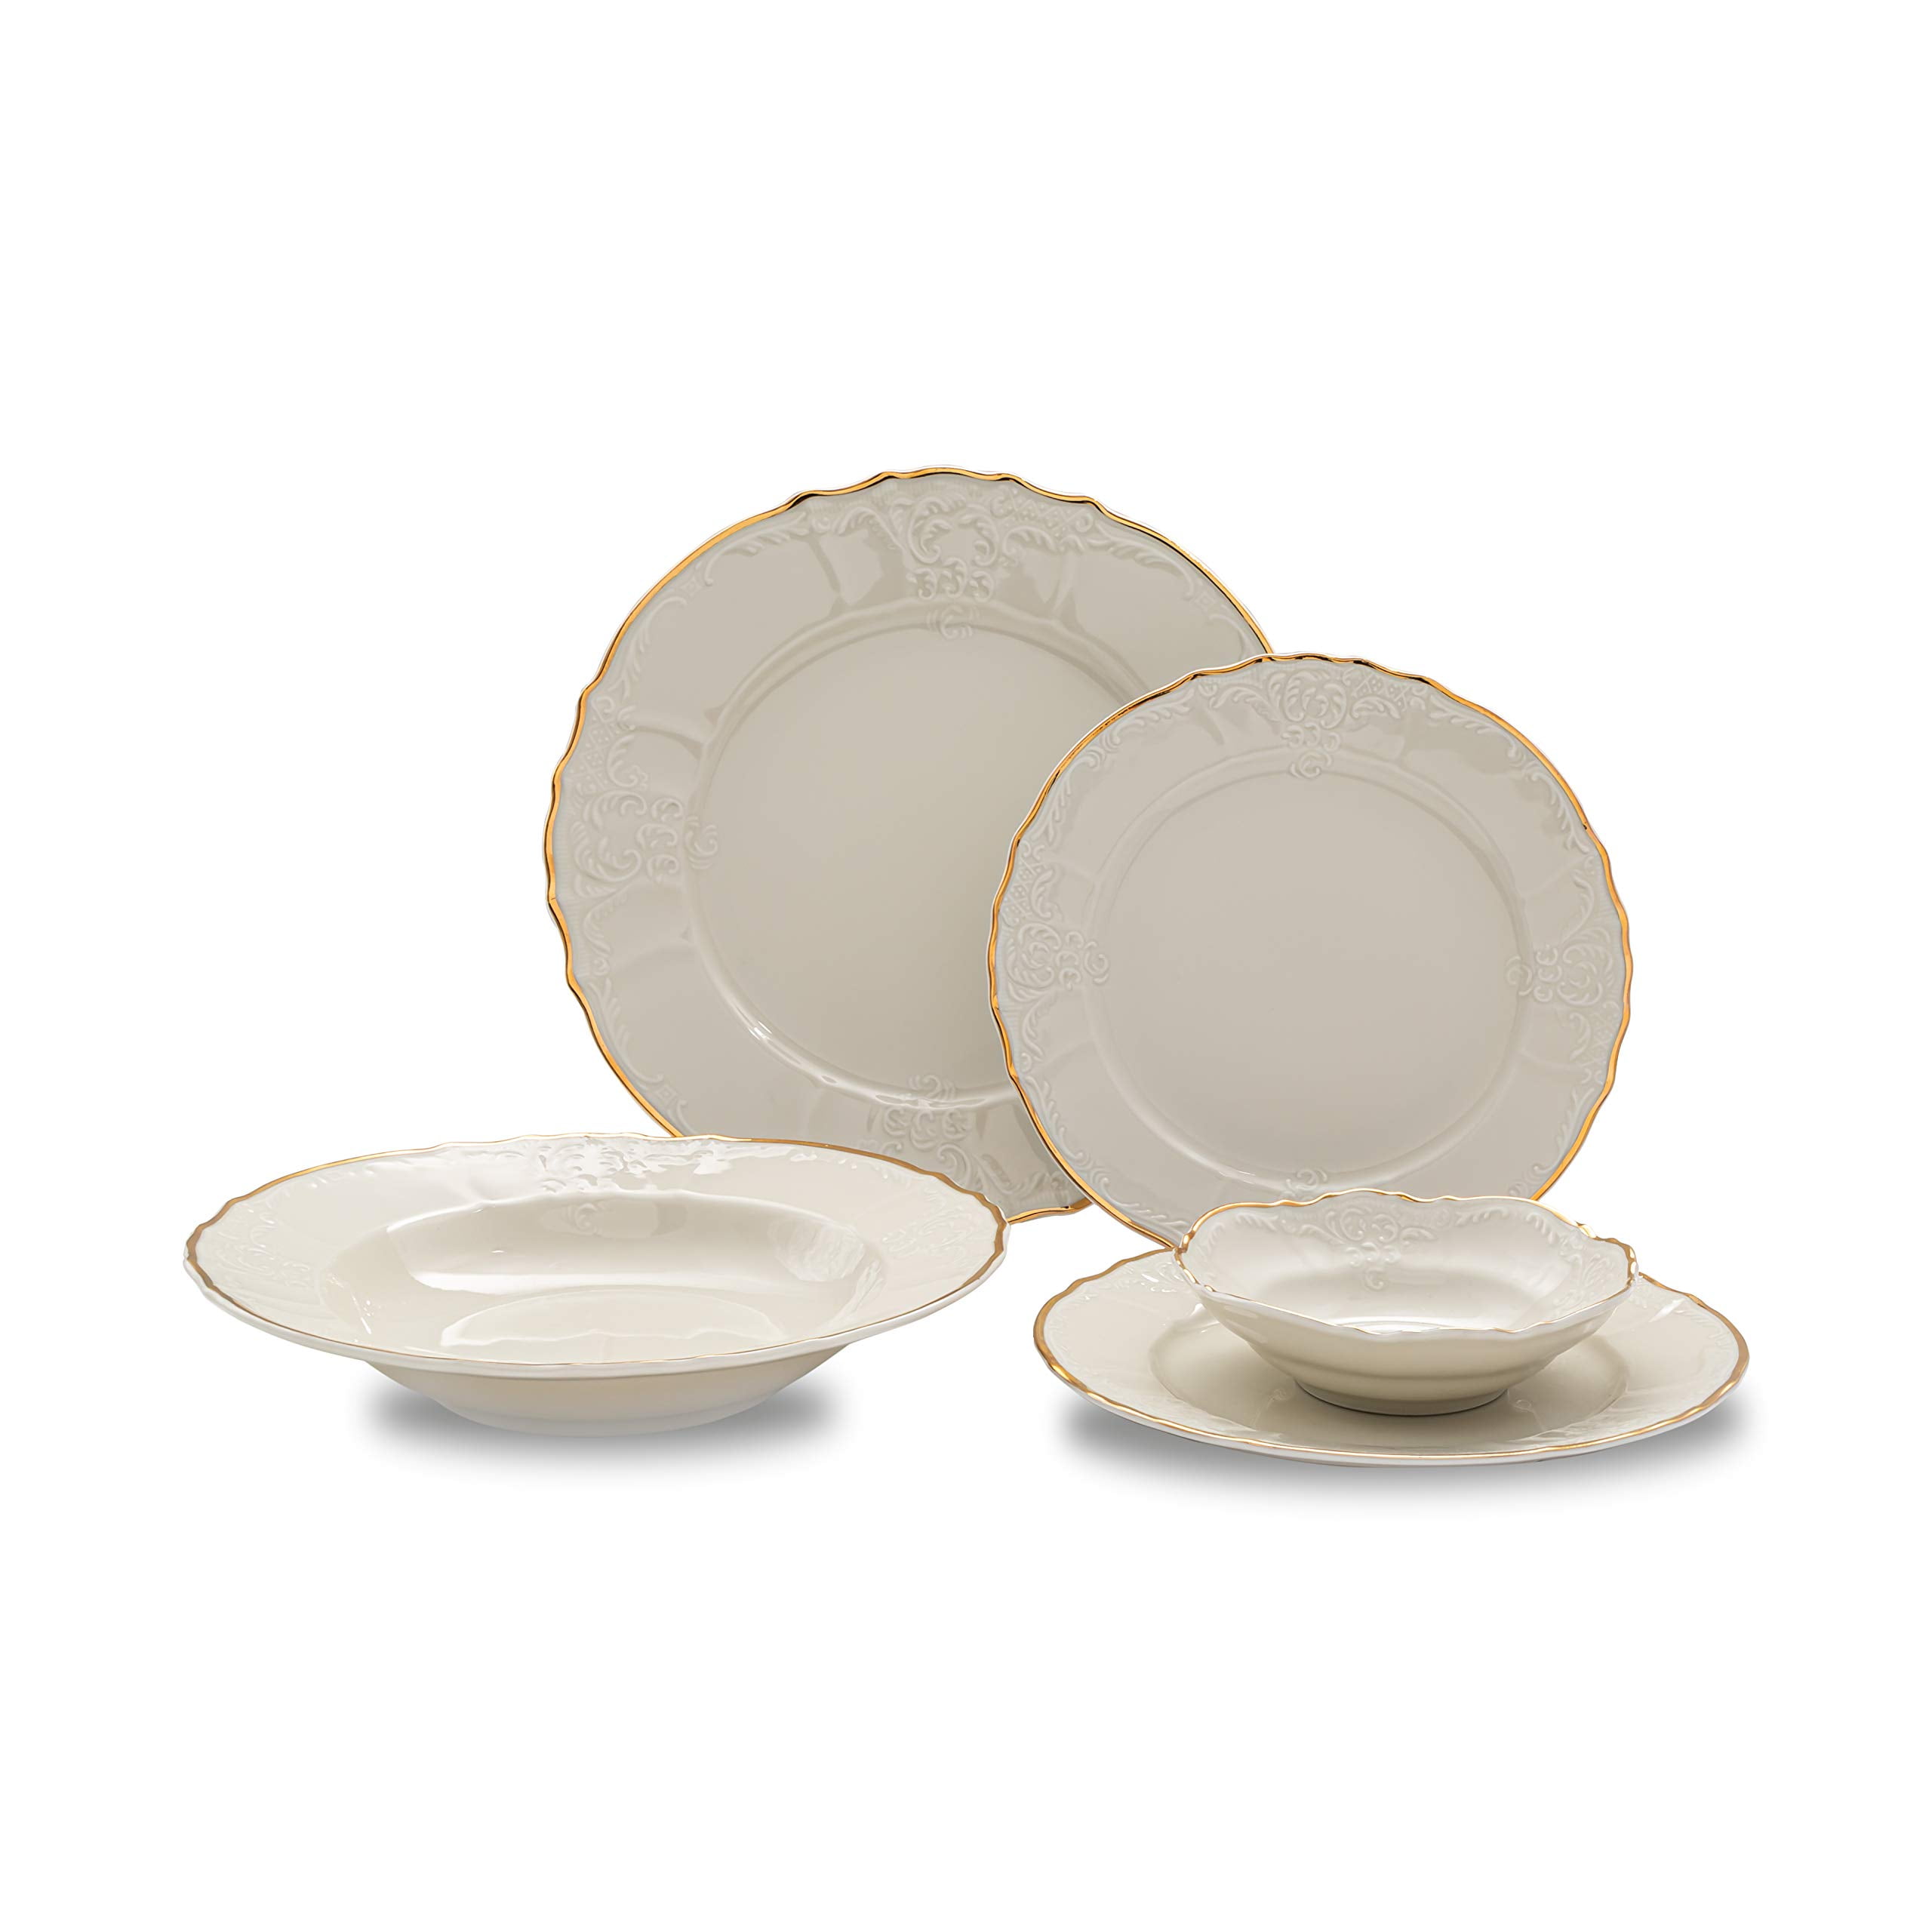 Ocean Décor China Dinnerware Set Set of Fine Porcelain Dishes   Service  for Four   Off White Dishes Set with Gold Rim for Entertaining and Formal  Use ...